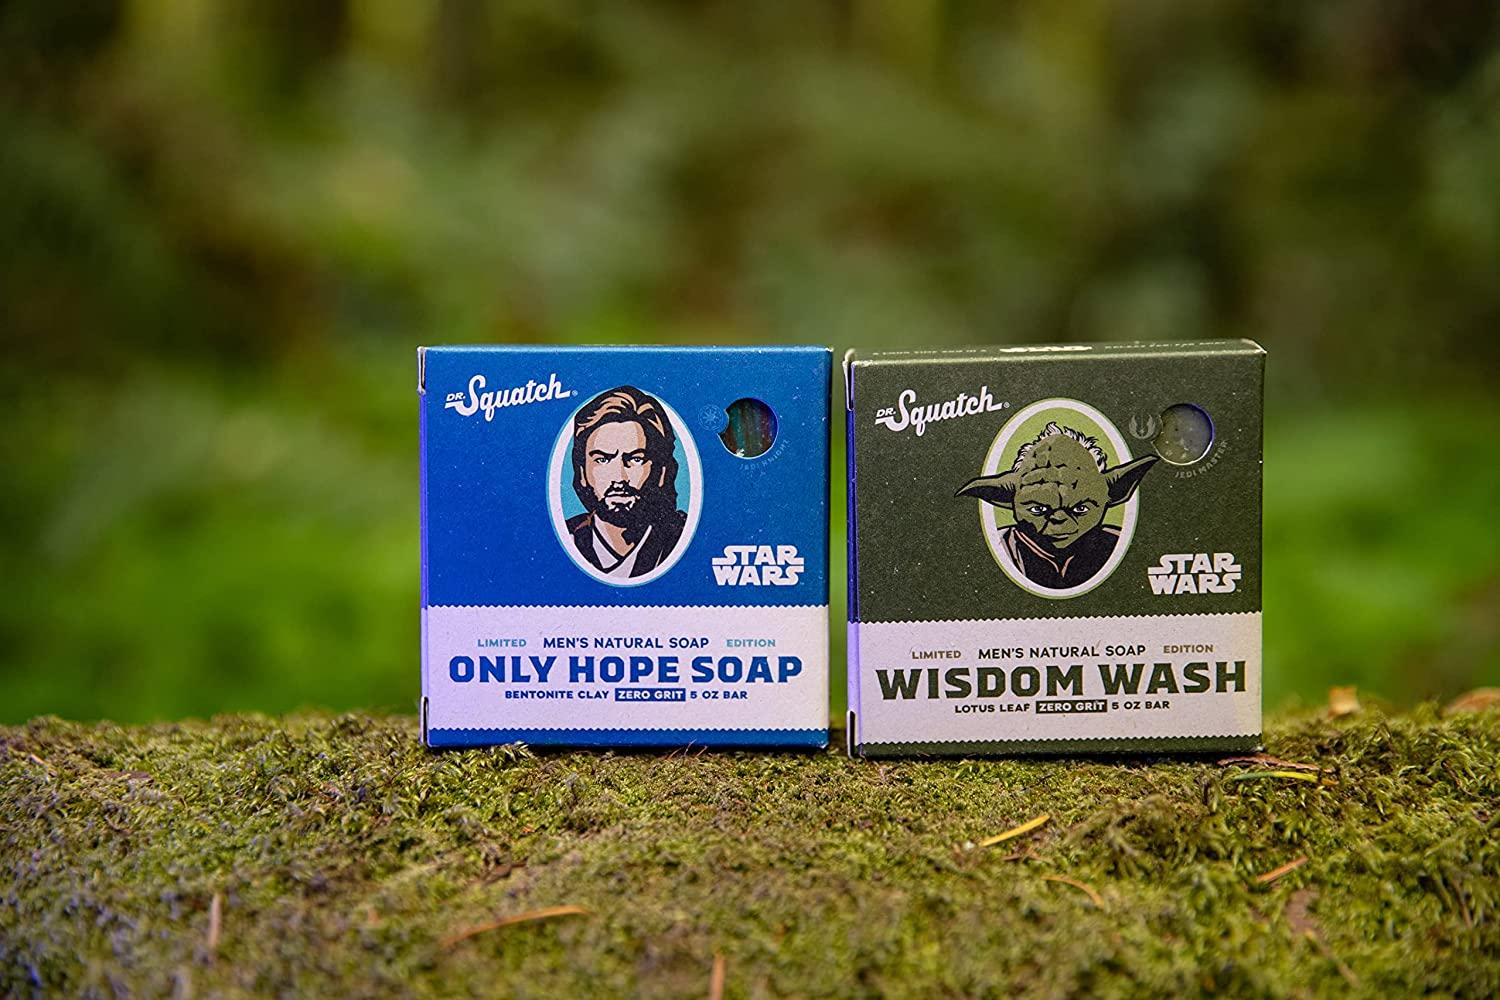 Dr. Squatch Limited Edition Soap Star Wars Soap Collection II